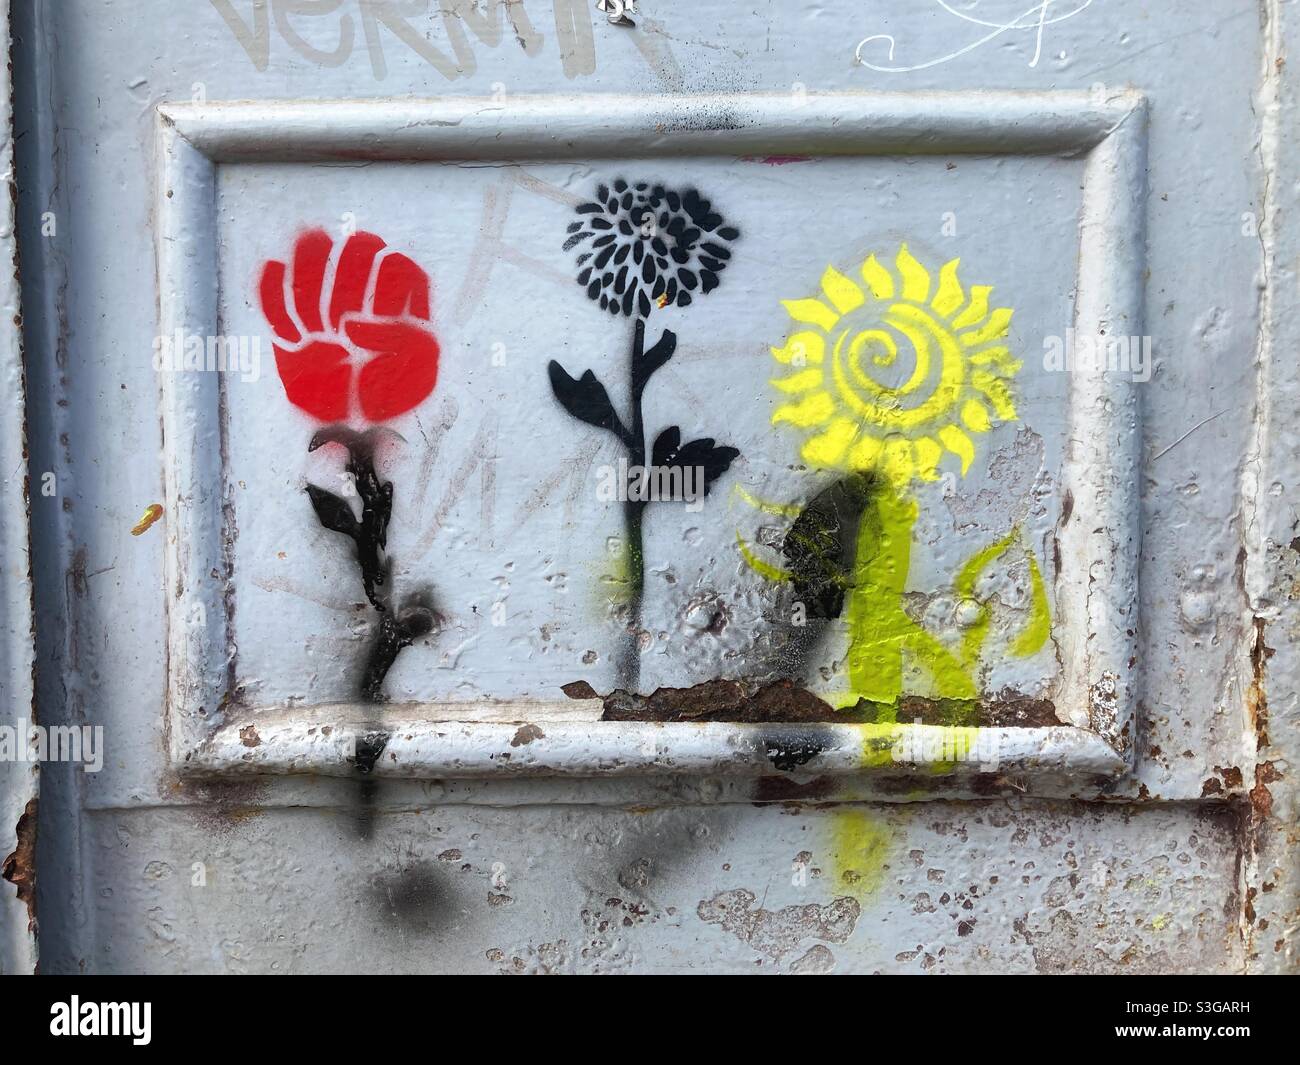 Stencil graffiti of flowers, one with a fist Stock Photo